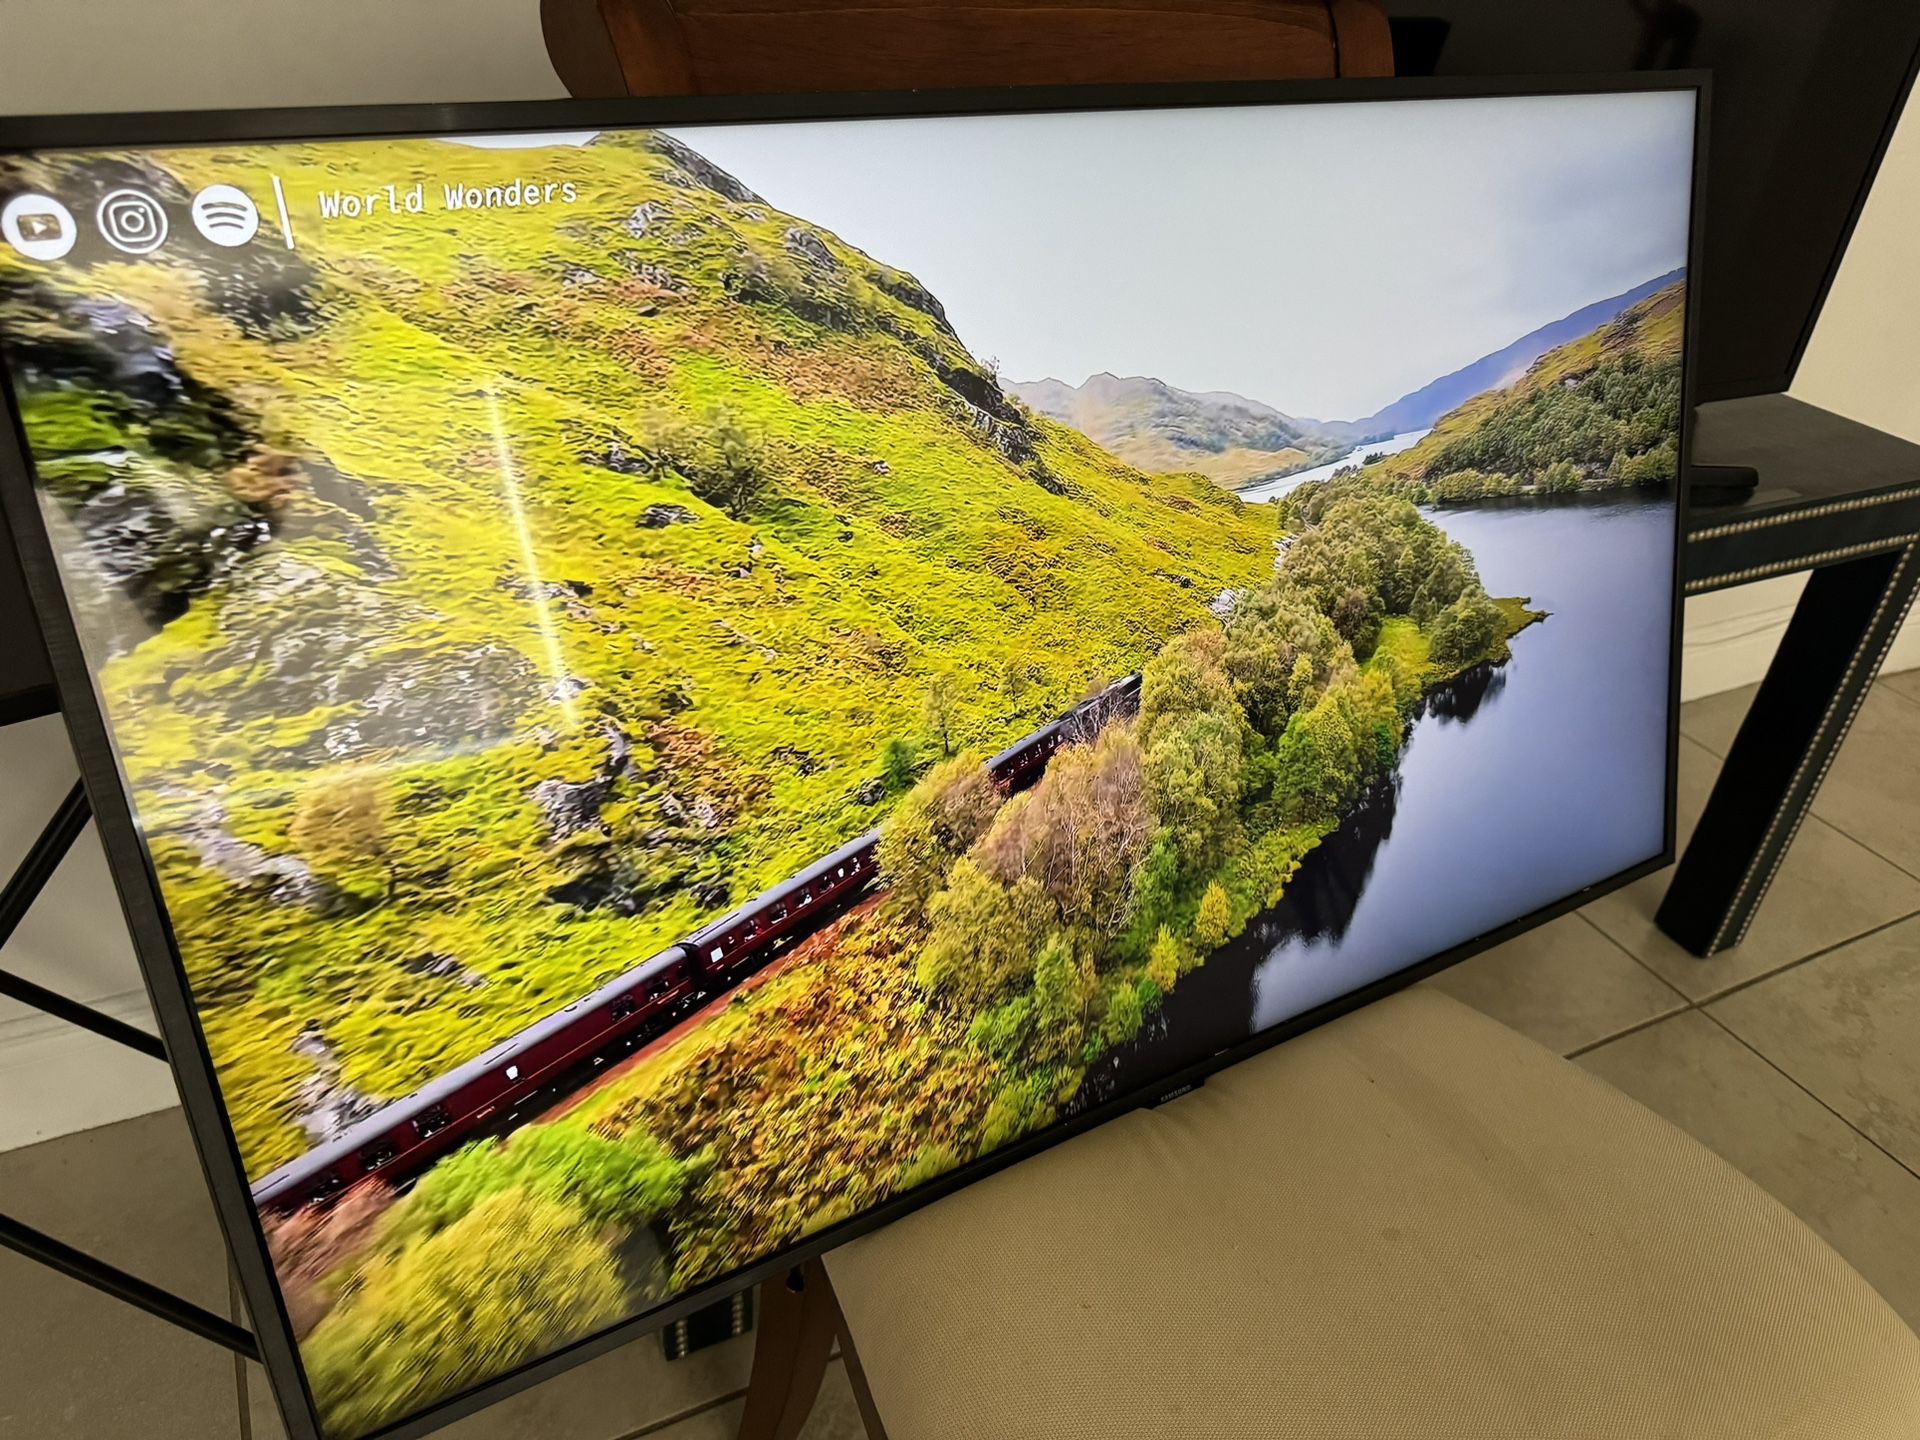 Samsung 43-inch QLED 4K Smart TV from the Q60 series. With Stand And Remote.